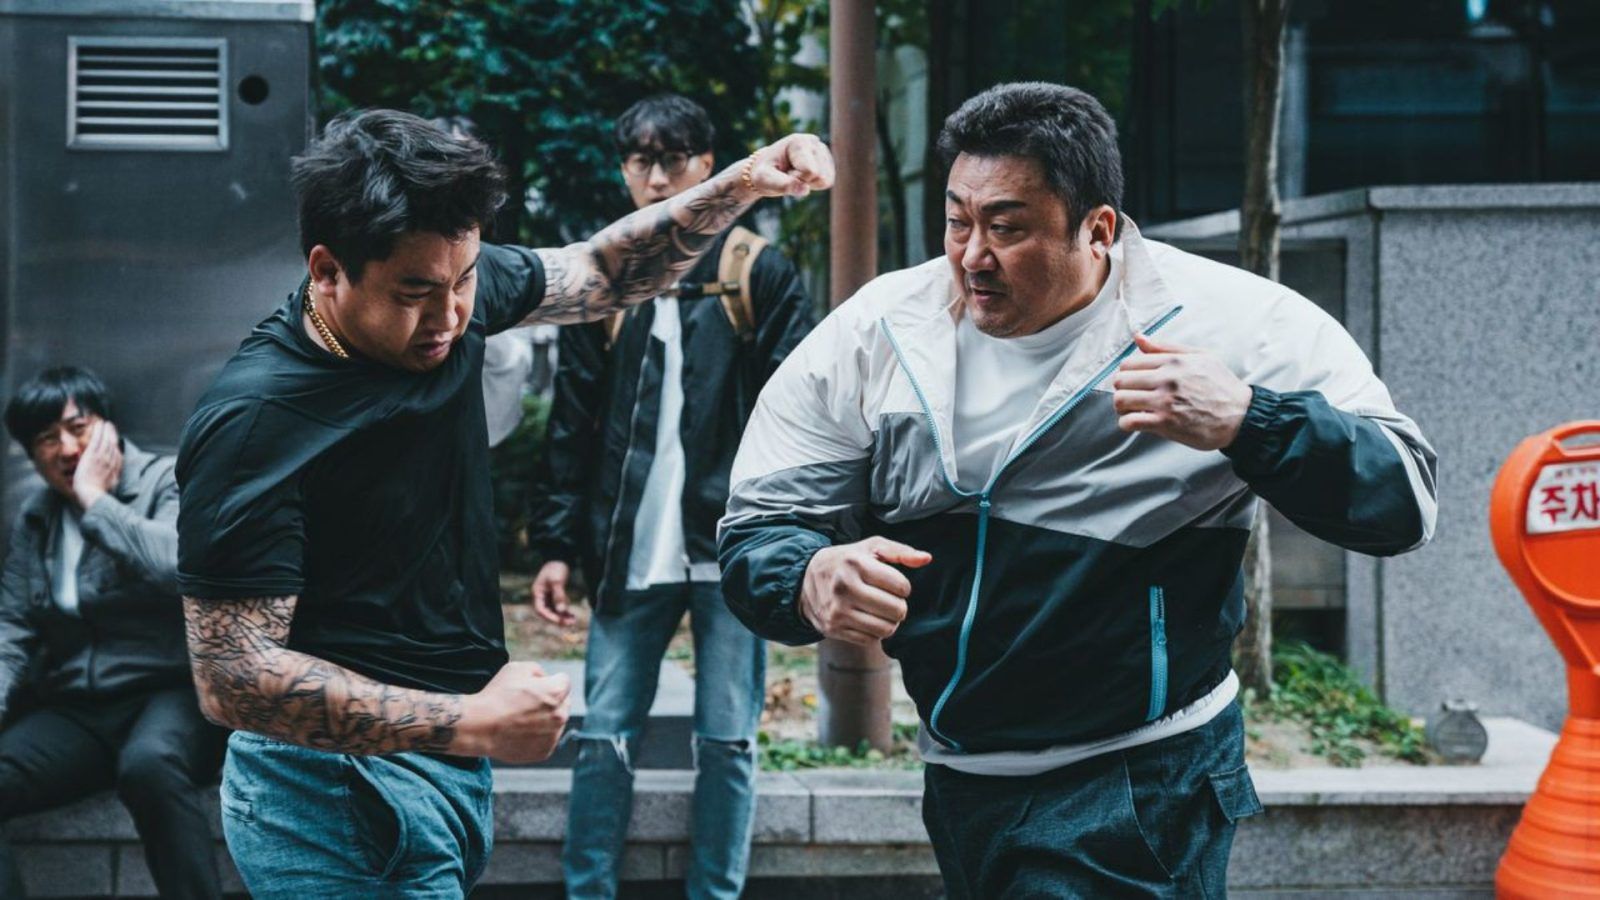 Korean Action-Comedy Movies That Are to Die For